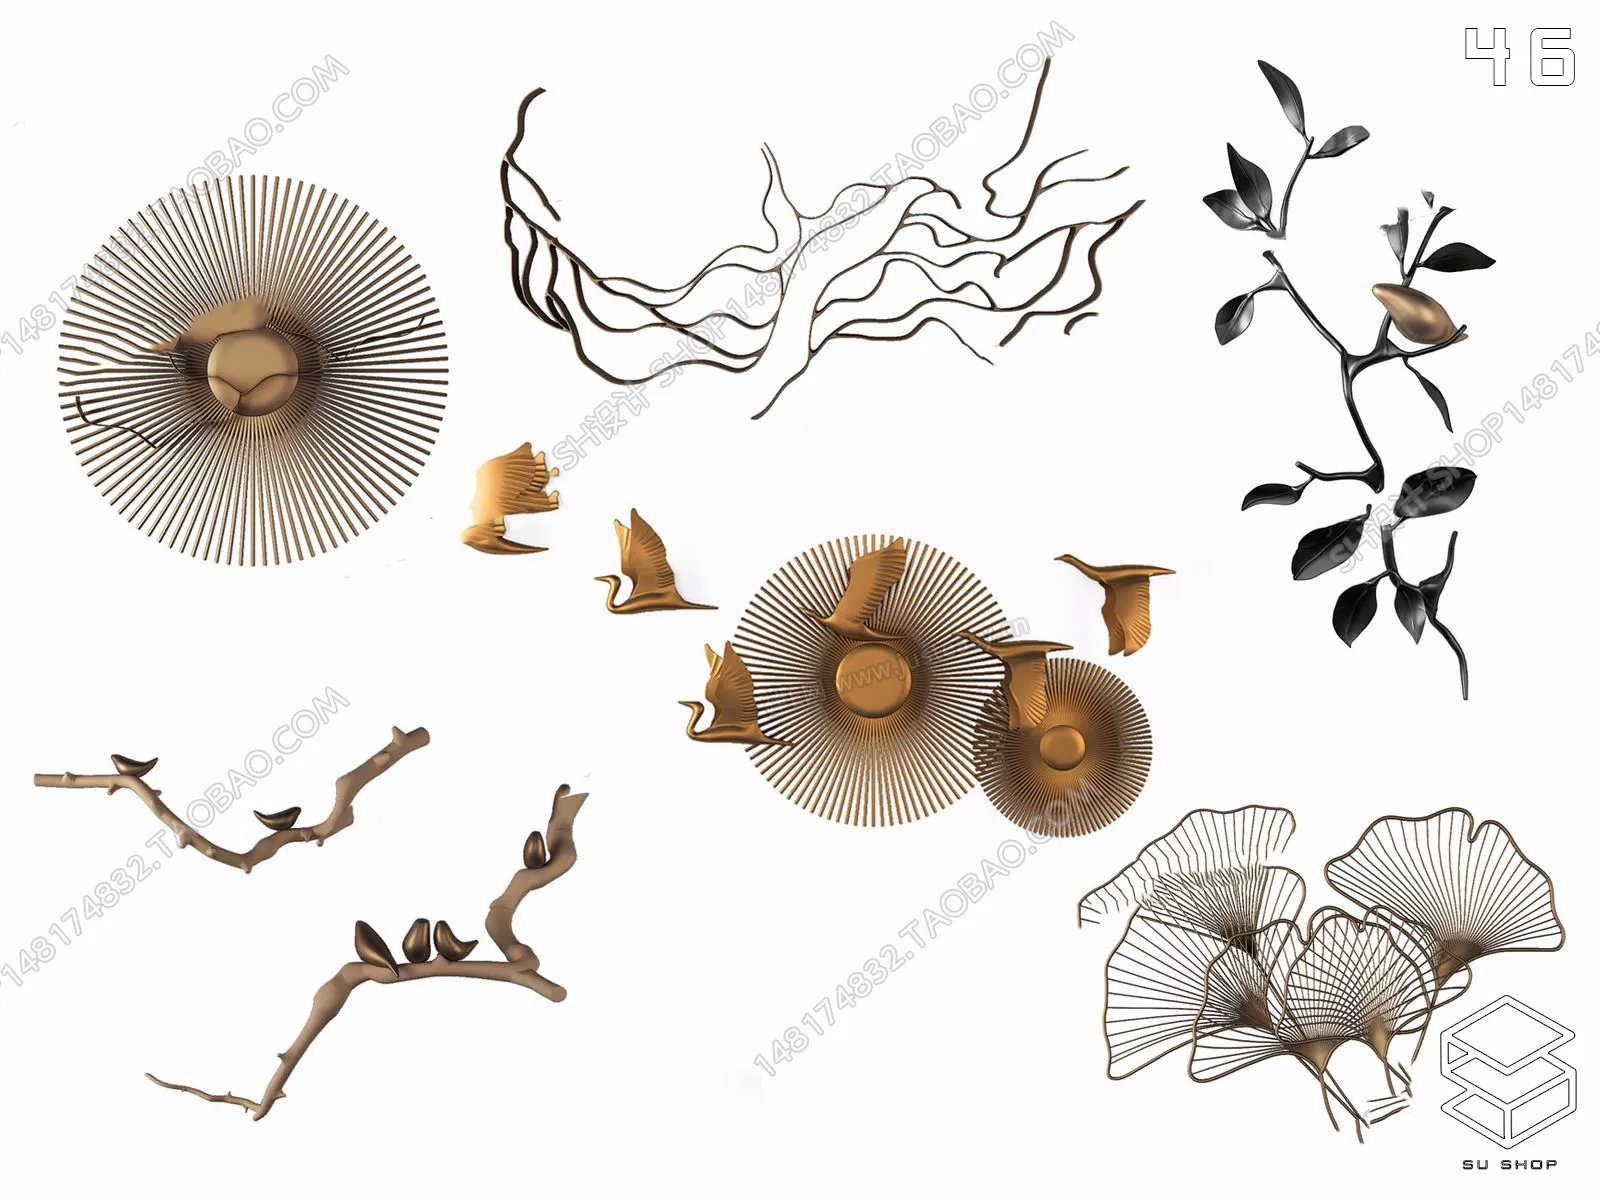 MODERN WALL DECOR - SKETCHUP 3D MODEL - VRAY OR ENSCAPE - ID15949